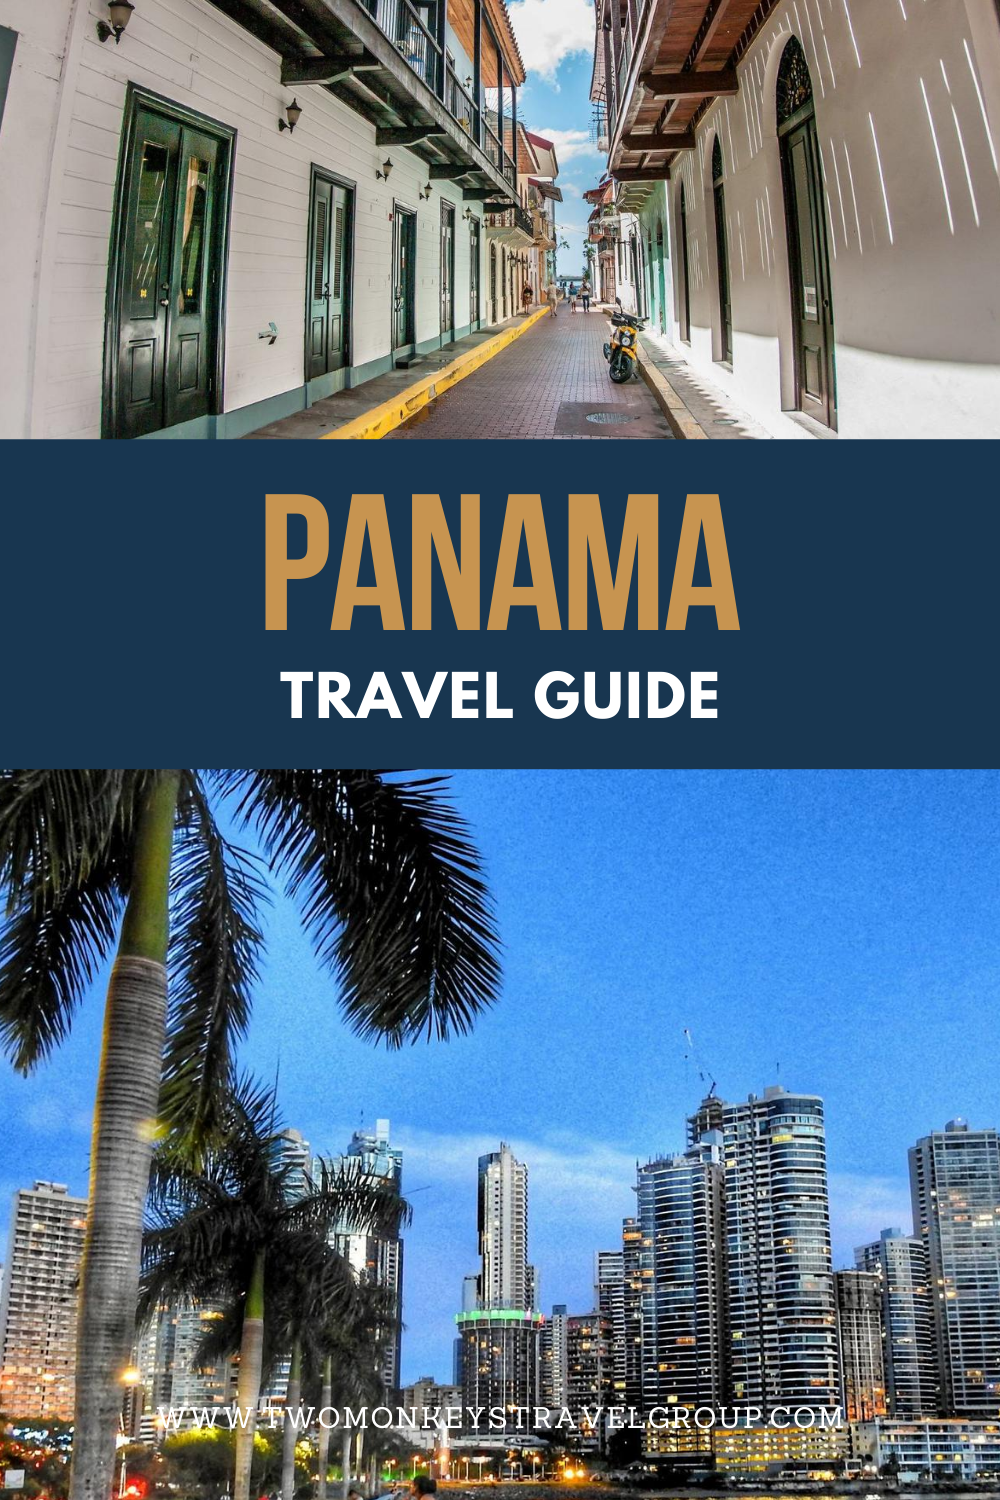 Travel Guide to Panama – How, Where & Frequently Asked Questions